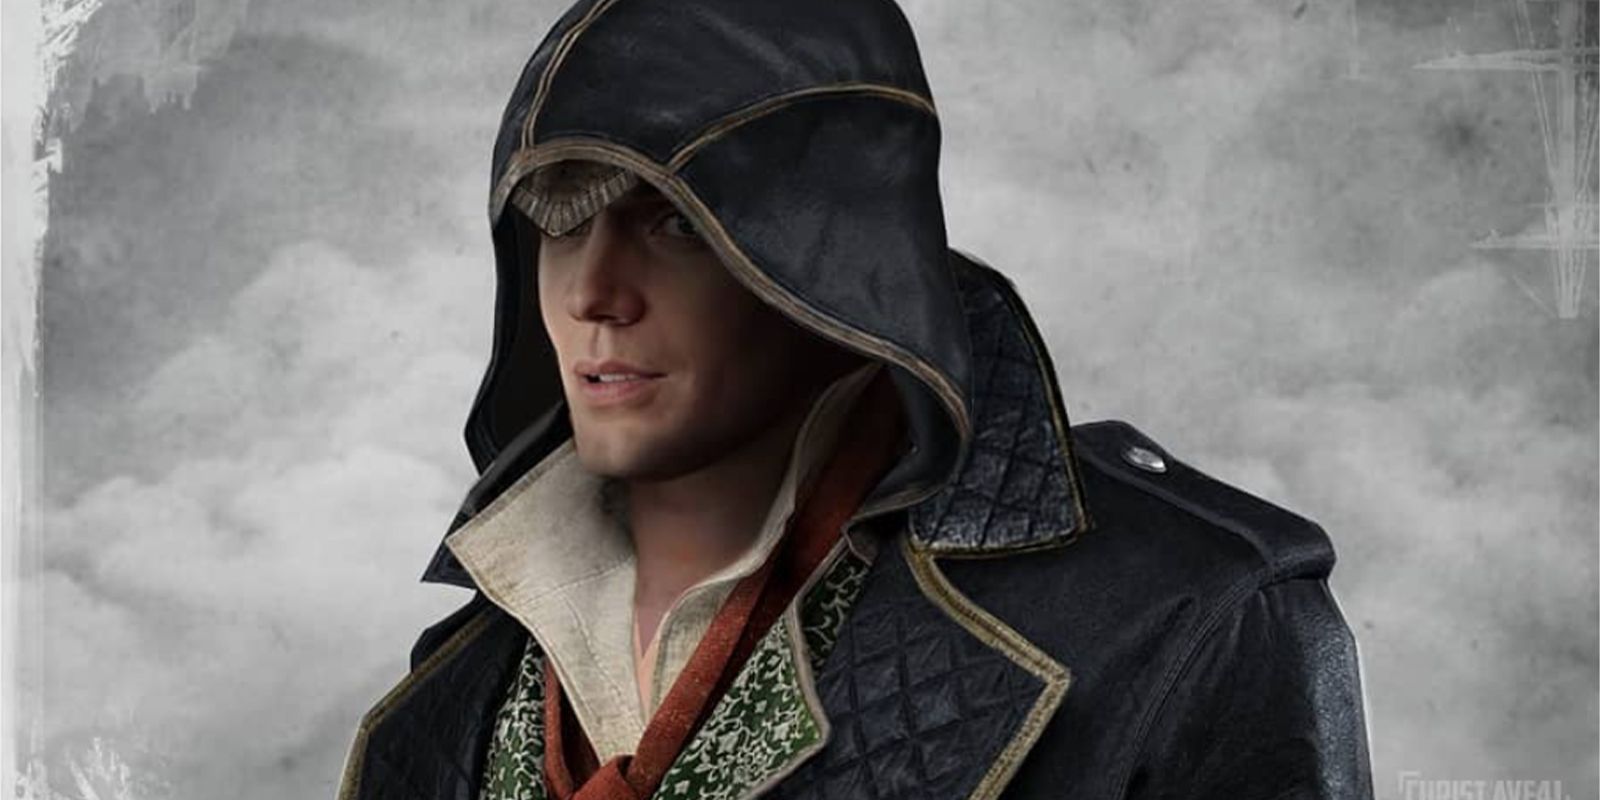 A new piece of Assassin's Creed art casts Henry Cavill as Jacob Frye